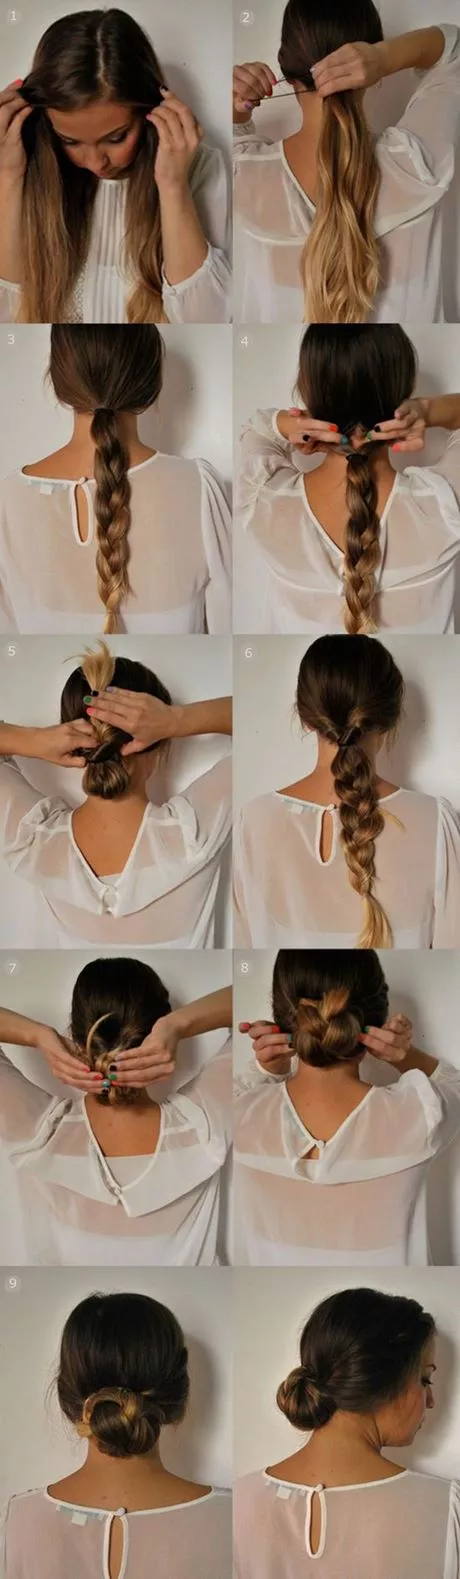 Cool and easy hairstyles for girls cool-and-easy-hairstyles-for-girls-44_8-15-15